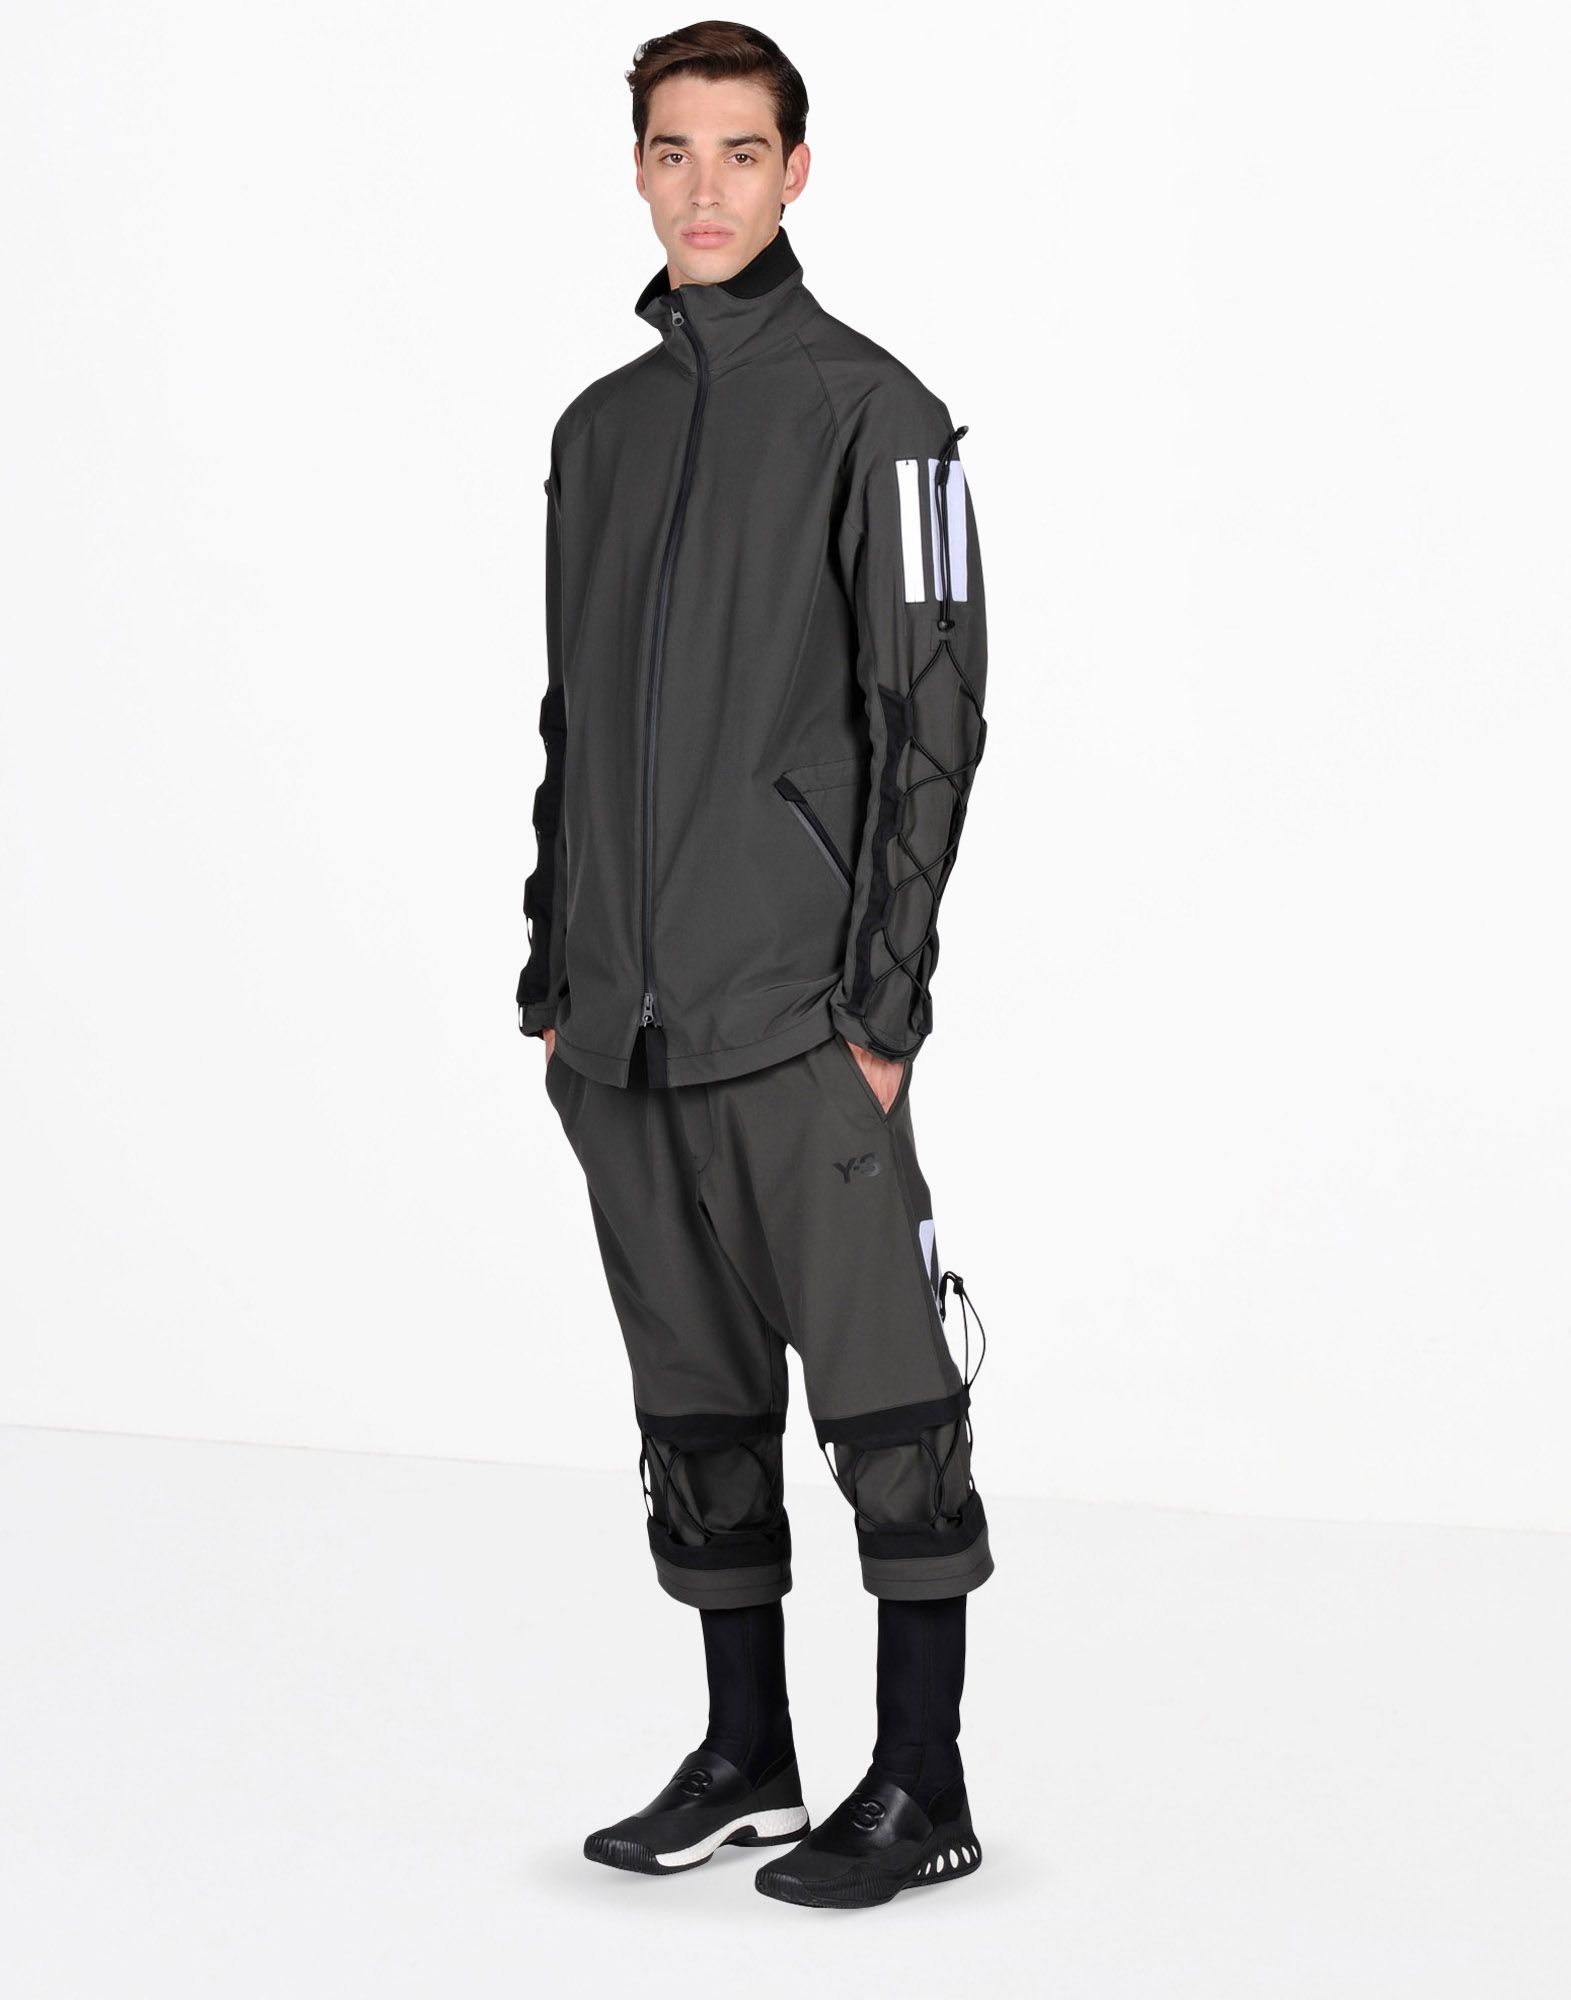 Y 3 3 LAYER CARGO SHORTS for Men | Adidas Y-3 Official Store